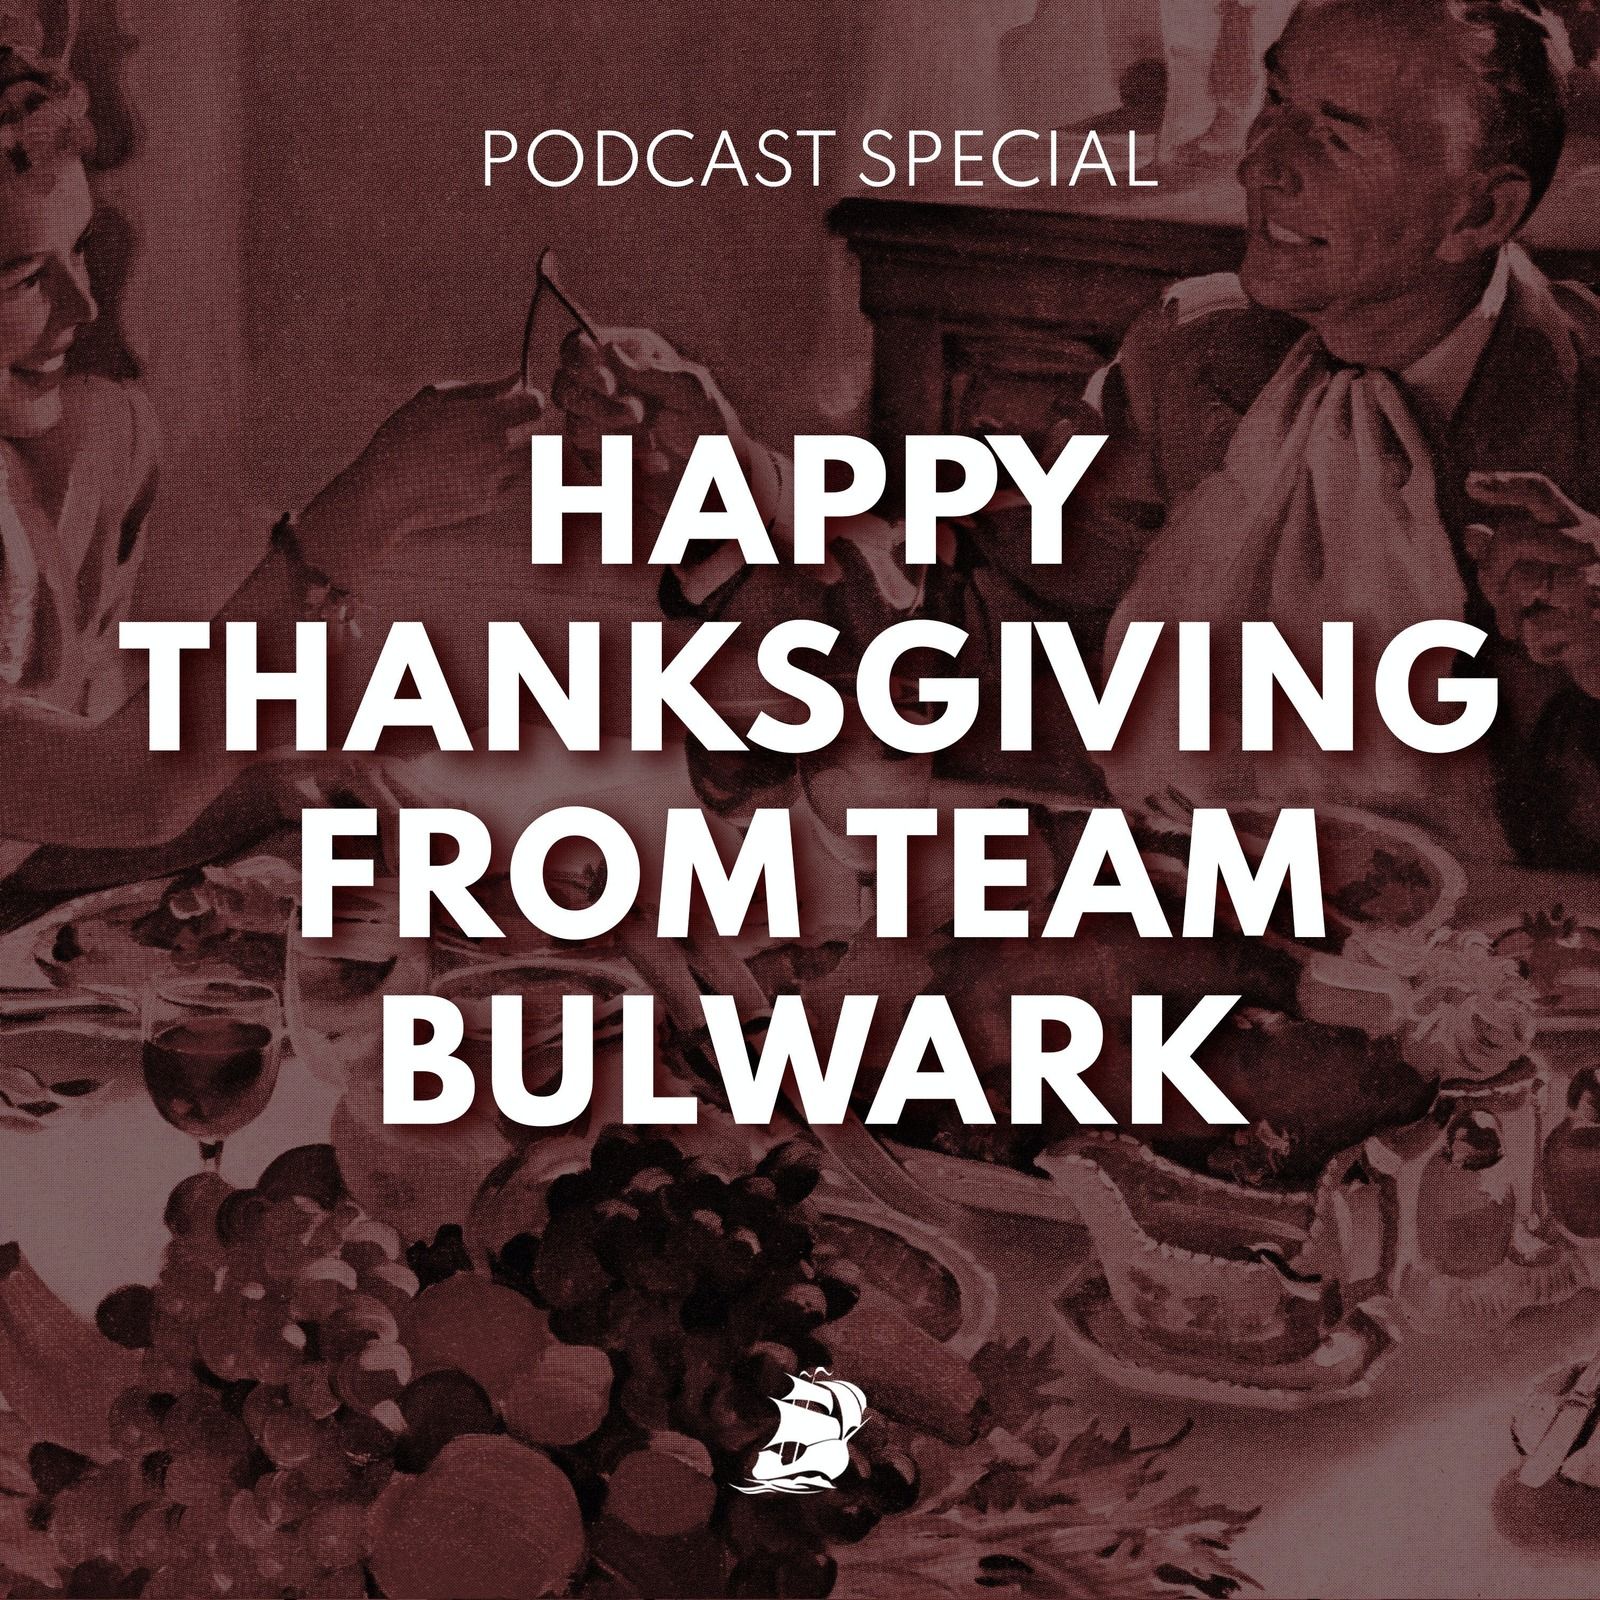  A Thanksgiving Message from Team Bulwark